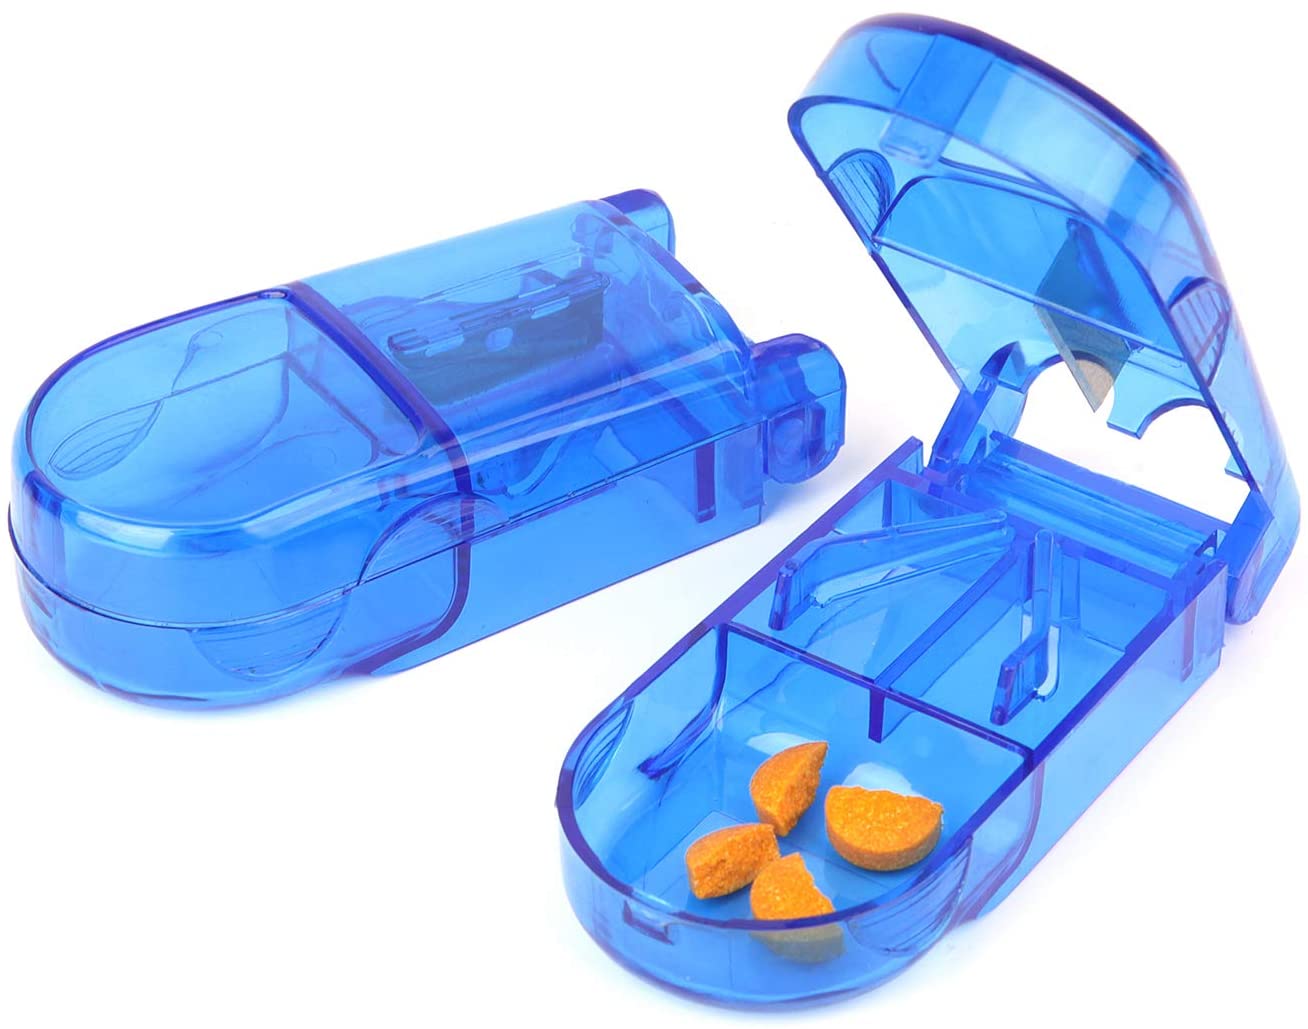 Portable Small Plastic Pill Cutter with Blade